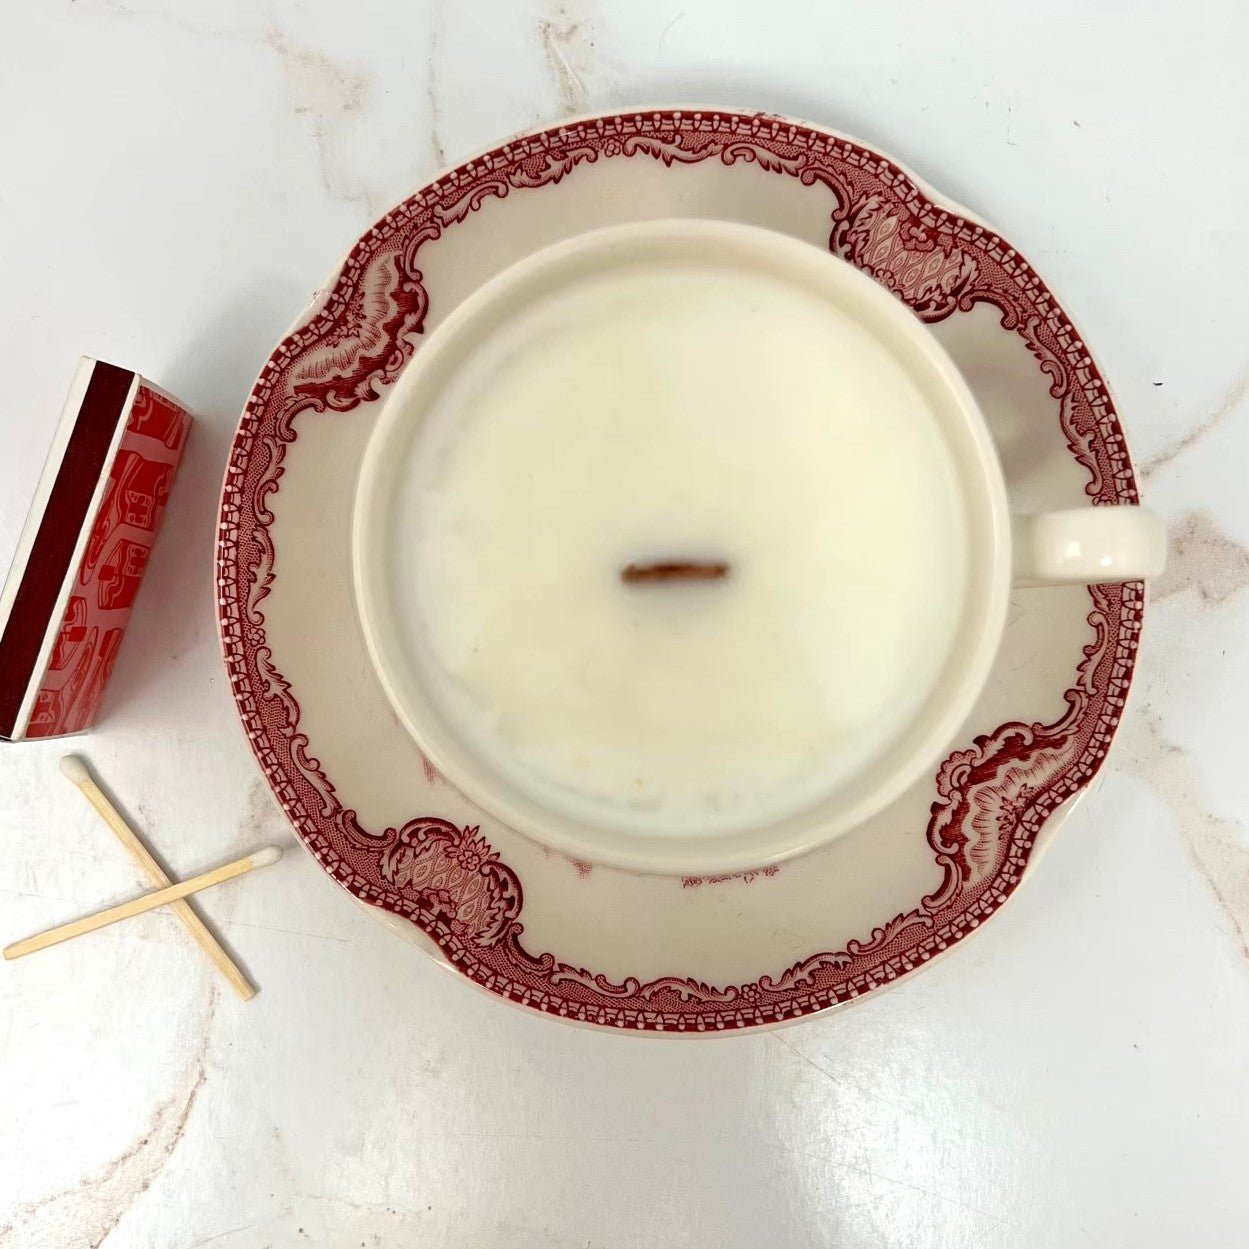 Have Old Teacups That you Never Use? Upcycle them! - The Brooklyn Teacup